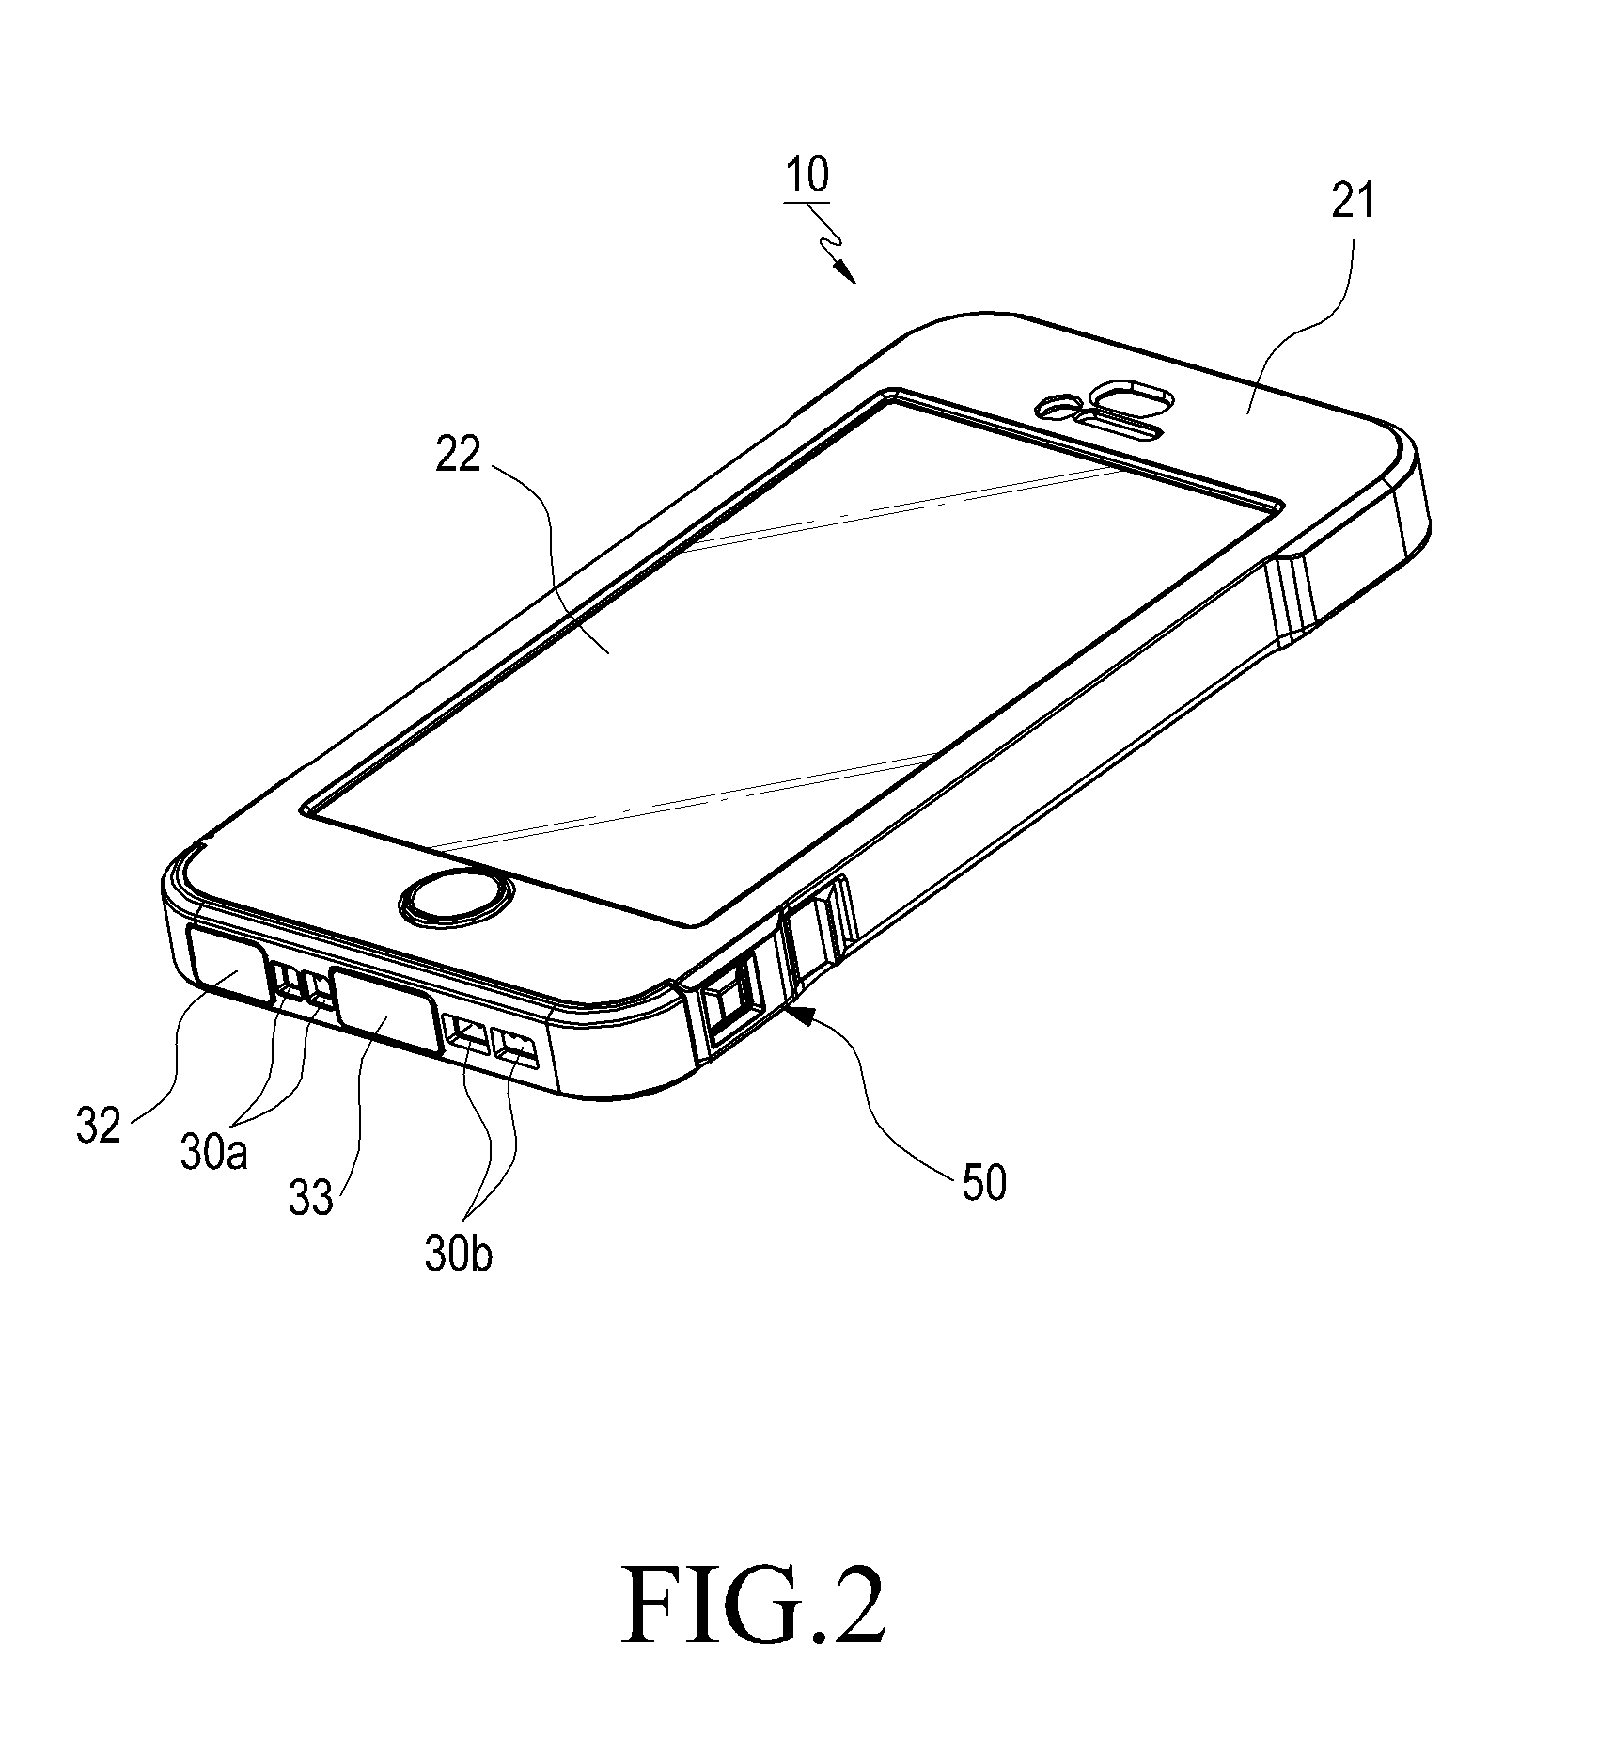 Waterproof case for electronic device